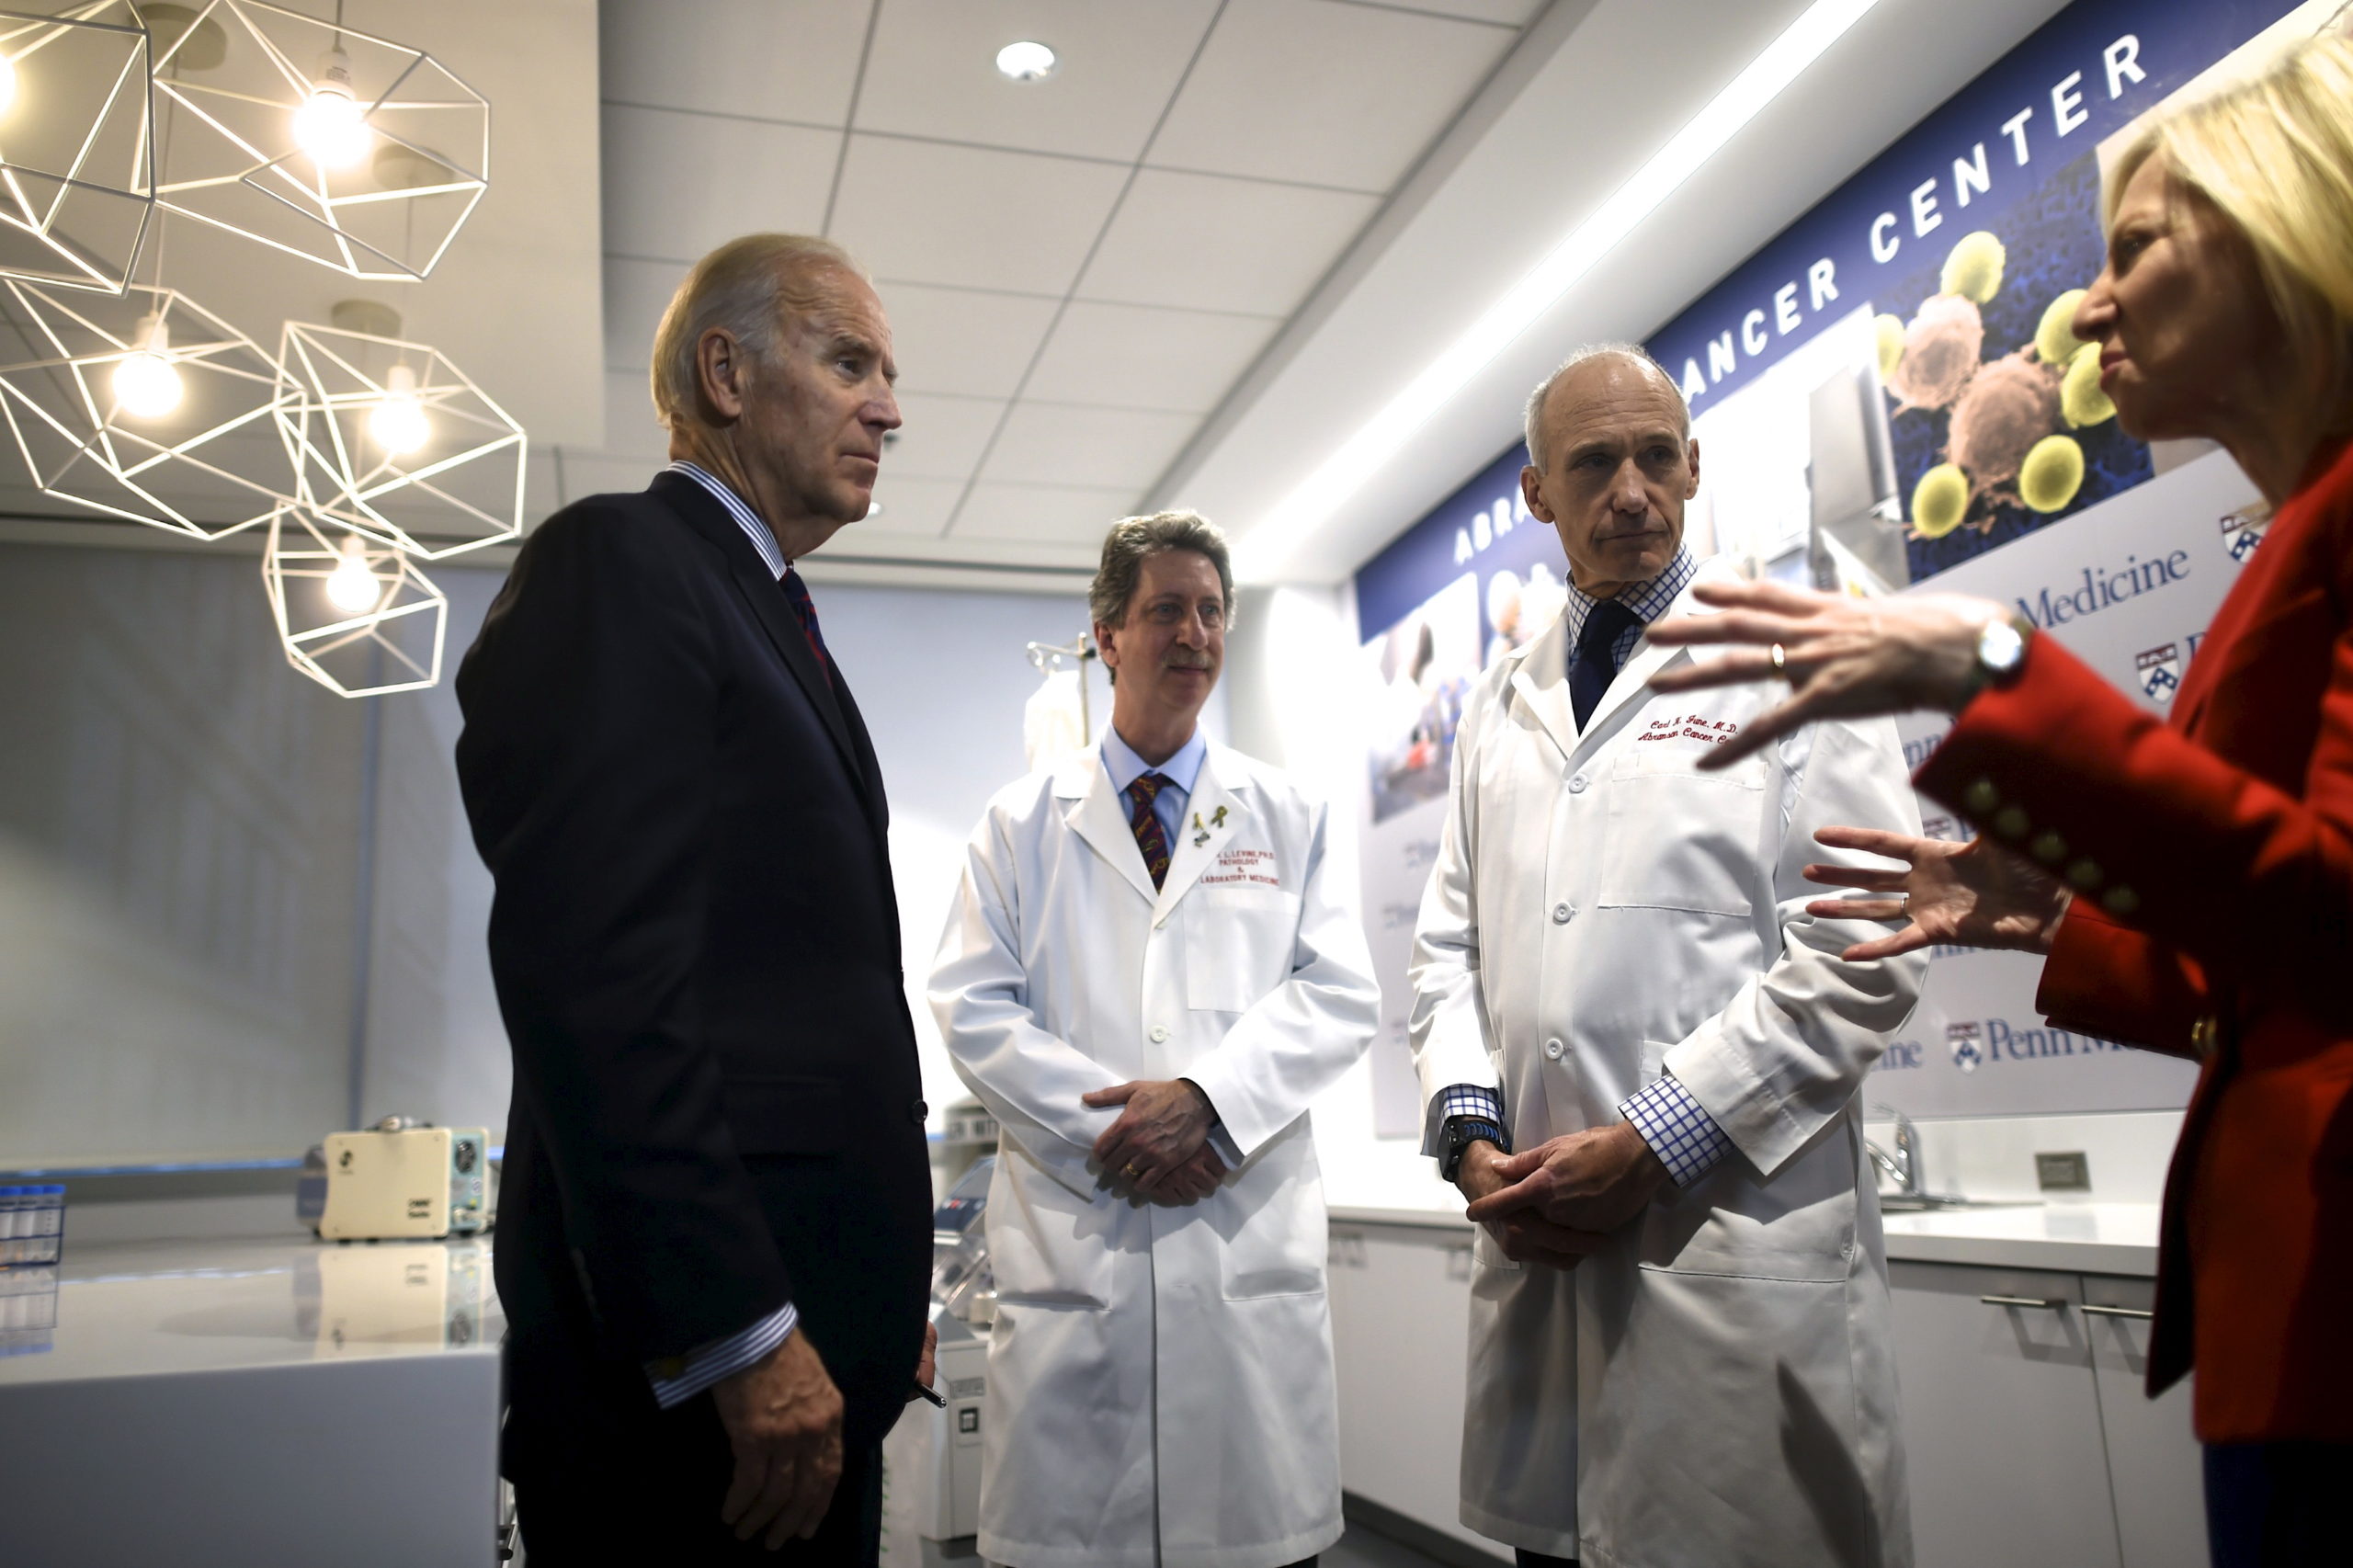 Vice President Joe Biden (L) meets with (C-R) Dr. Bruce Levine, Dr. Carl June, and University of Pennsylvania President Amy Gutmann while touring the University of Pennsylvania, Perelman School of Medicine and Abramson Cancer Center in Philadelphia, Pennsylvania January 15, 2016. During the State of the Union address Tuesday, President Obama tasked Biden to spearhead an initiative to cure cancer. REUTERS/Mark Makela